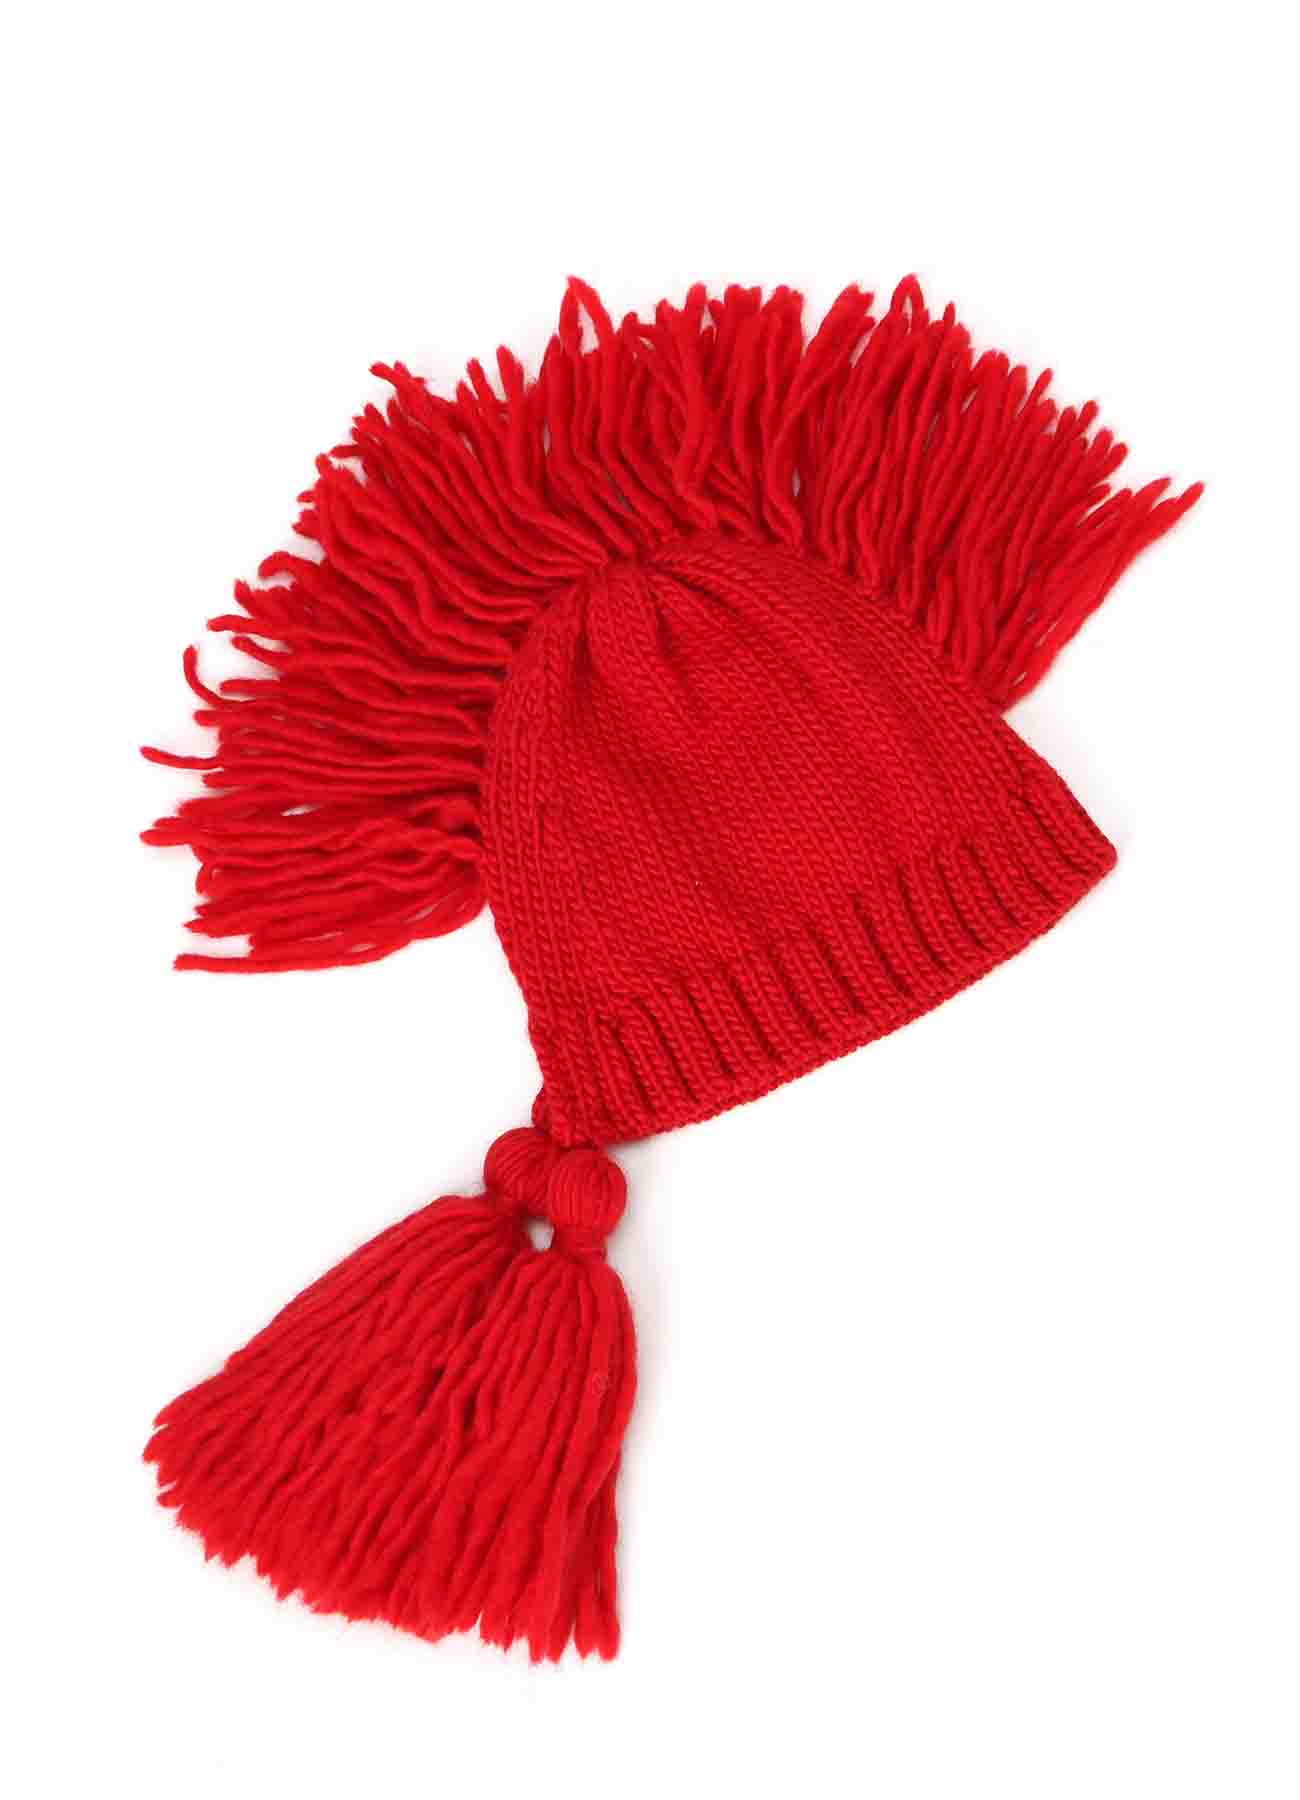 KNITTED WOOL JERSEY HAT WITH TASSELS AND SPIKES